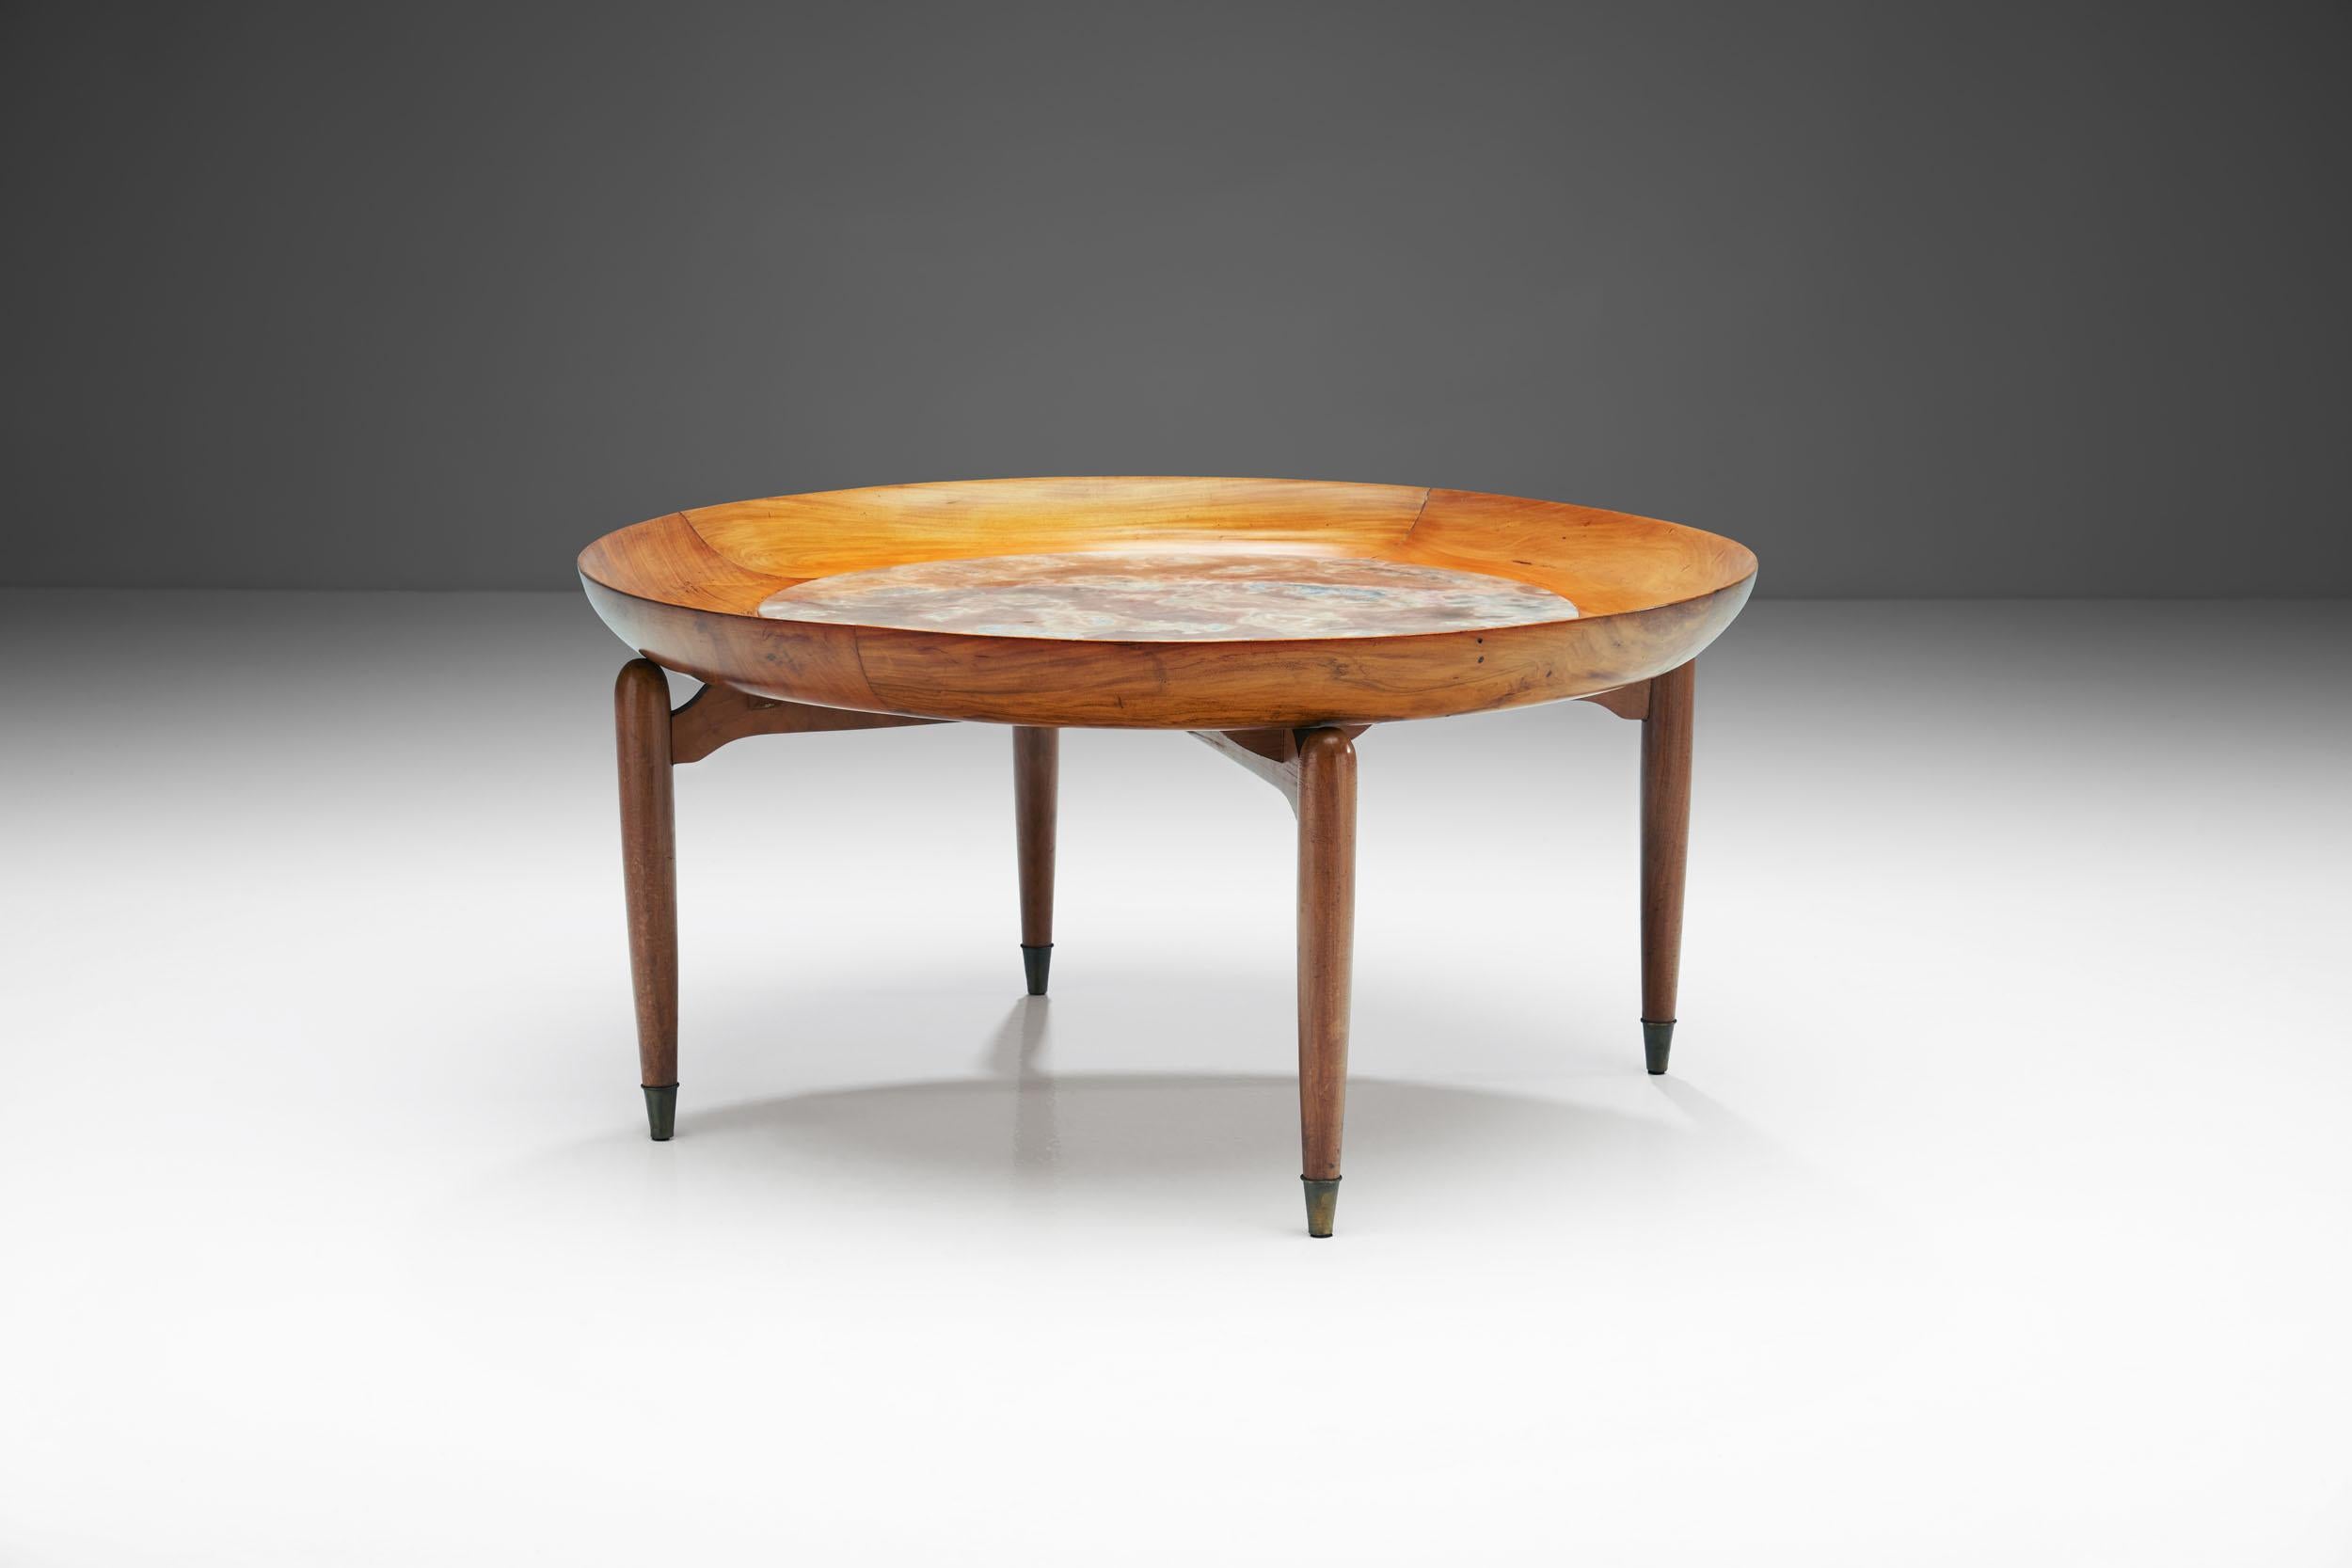 This Giuseppe Scapinelli round coffee table is made of caviuna wood and features a unique marble inlay. Scapinelli often combined ceramics and wood, and this table is among the most beautiful examples. 

This rare circular coffee table has a curvy